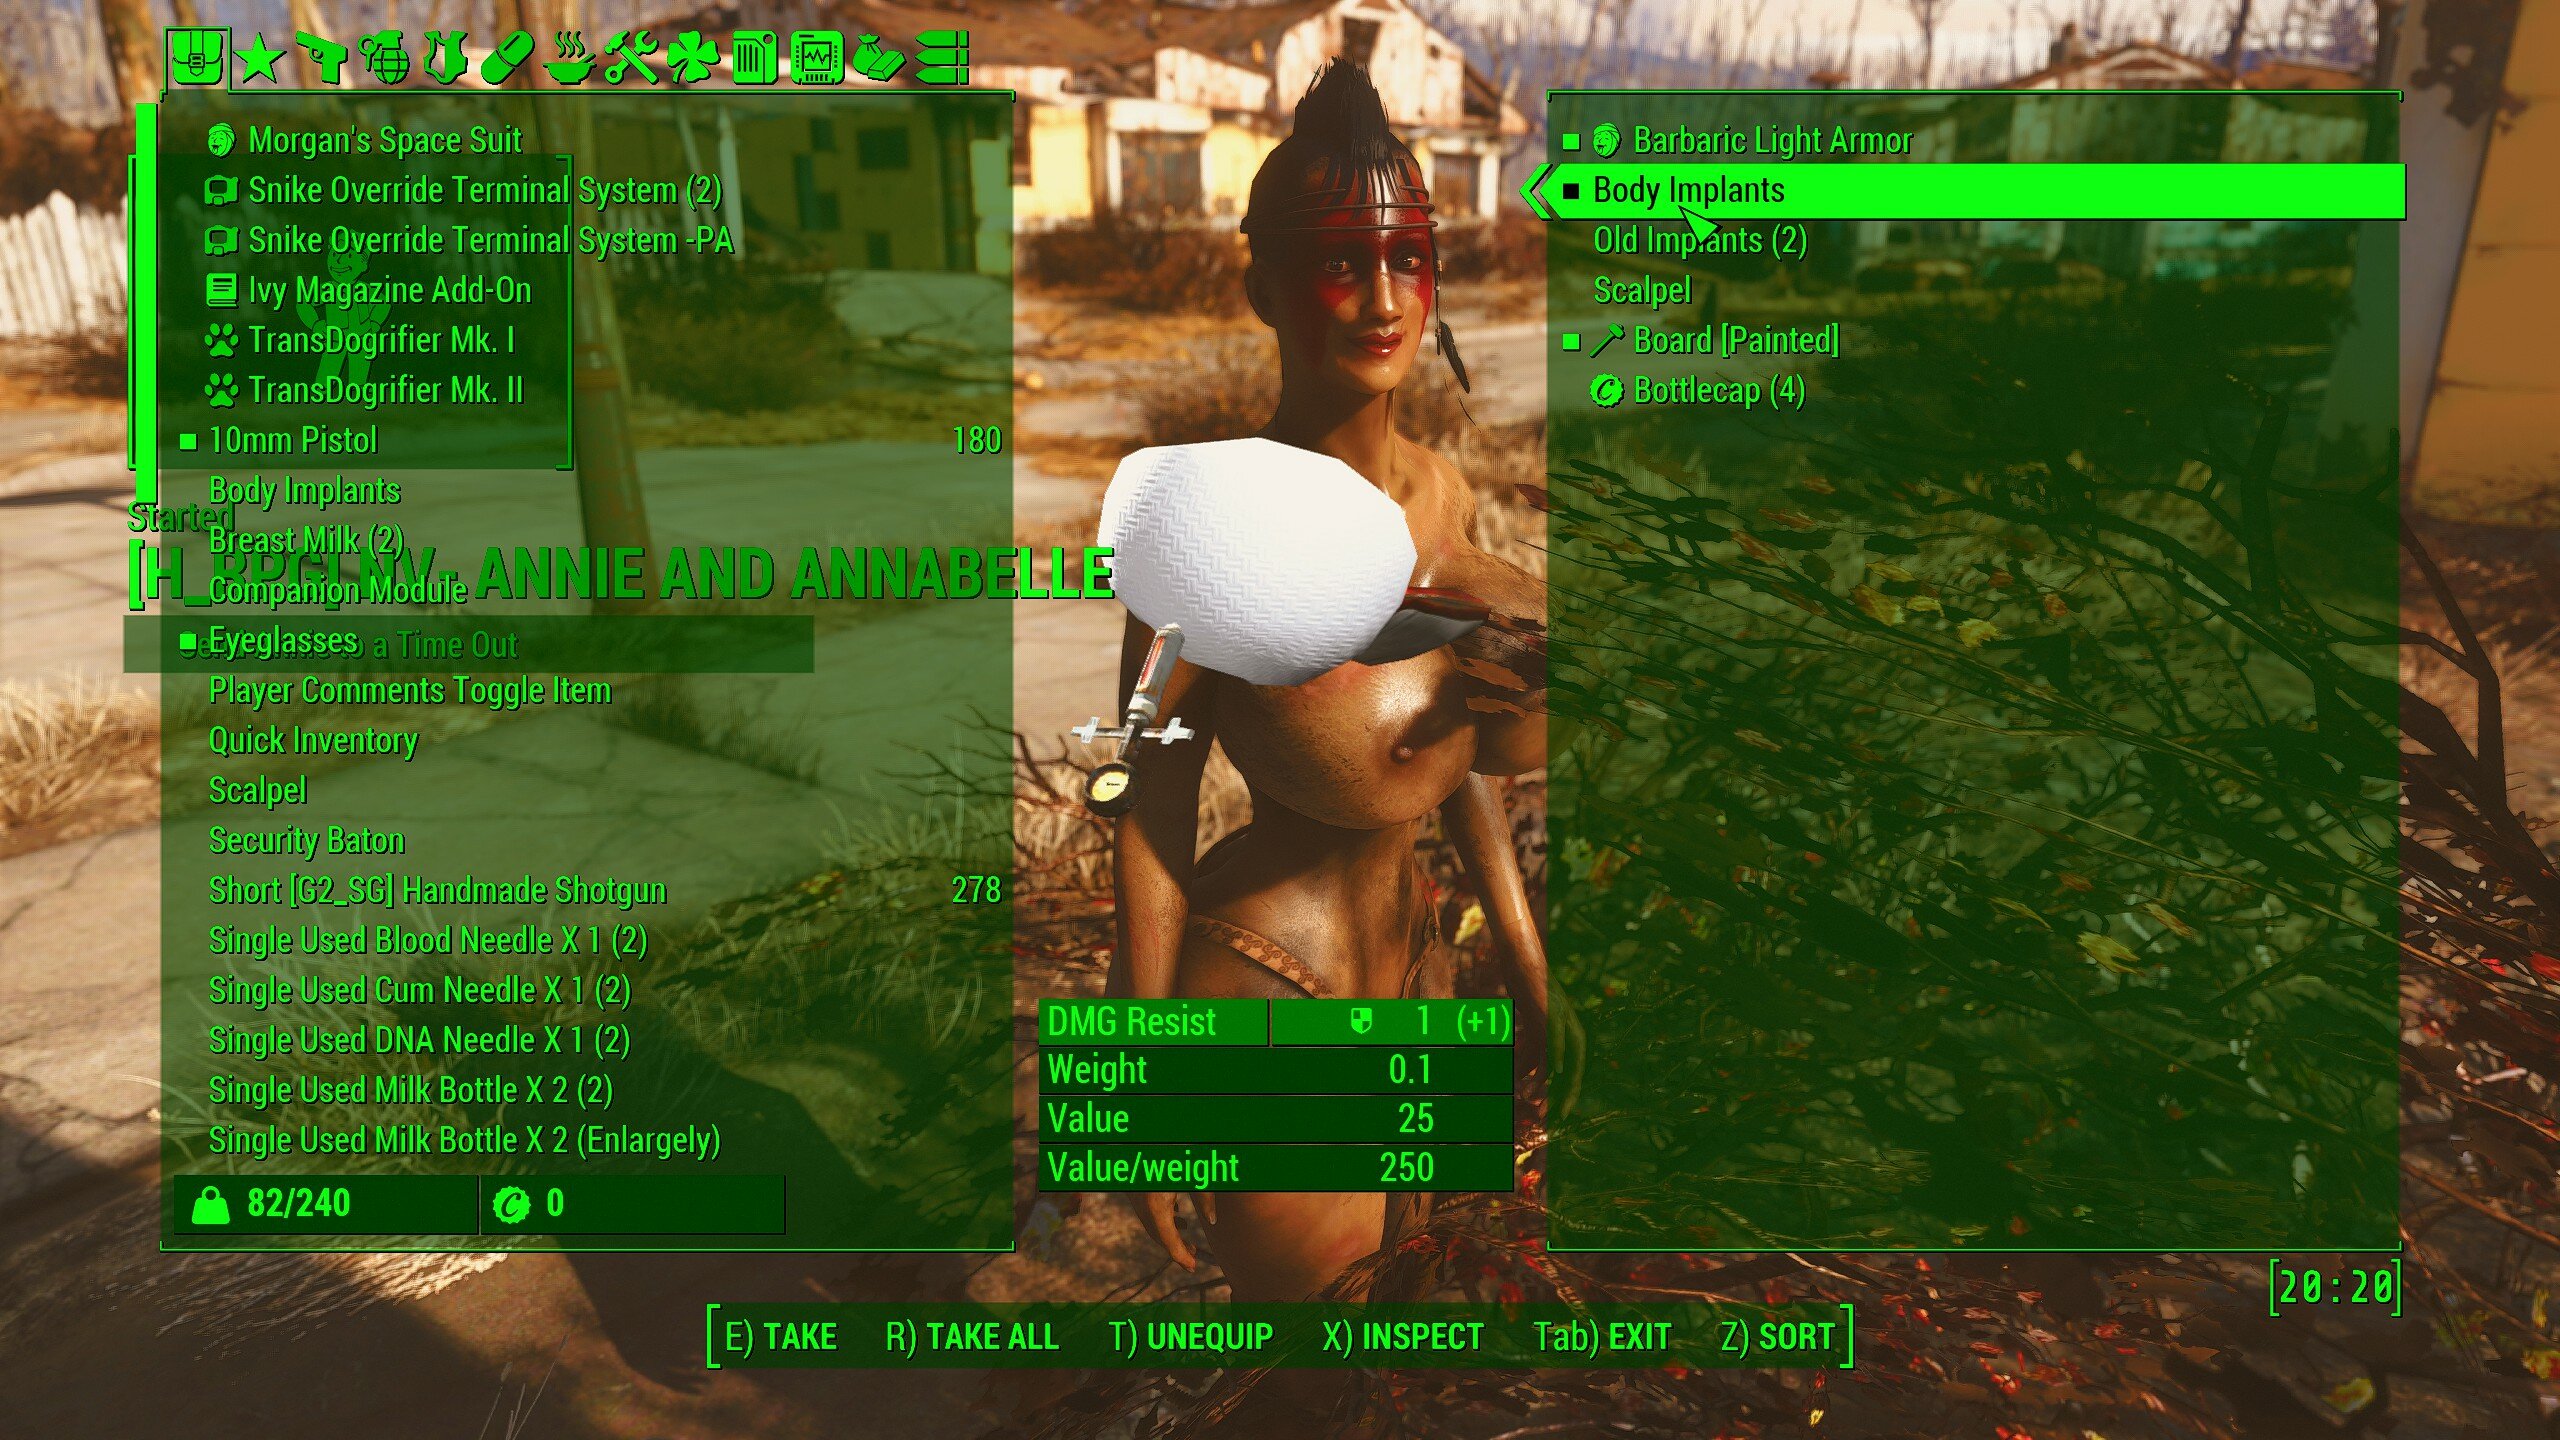 INVB_BodyMorphs - Downloads - Fallout 4 Non Adult Mods - LoversLab